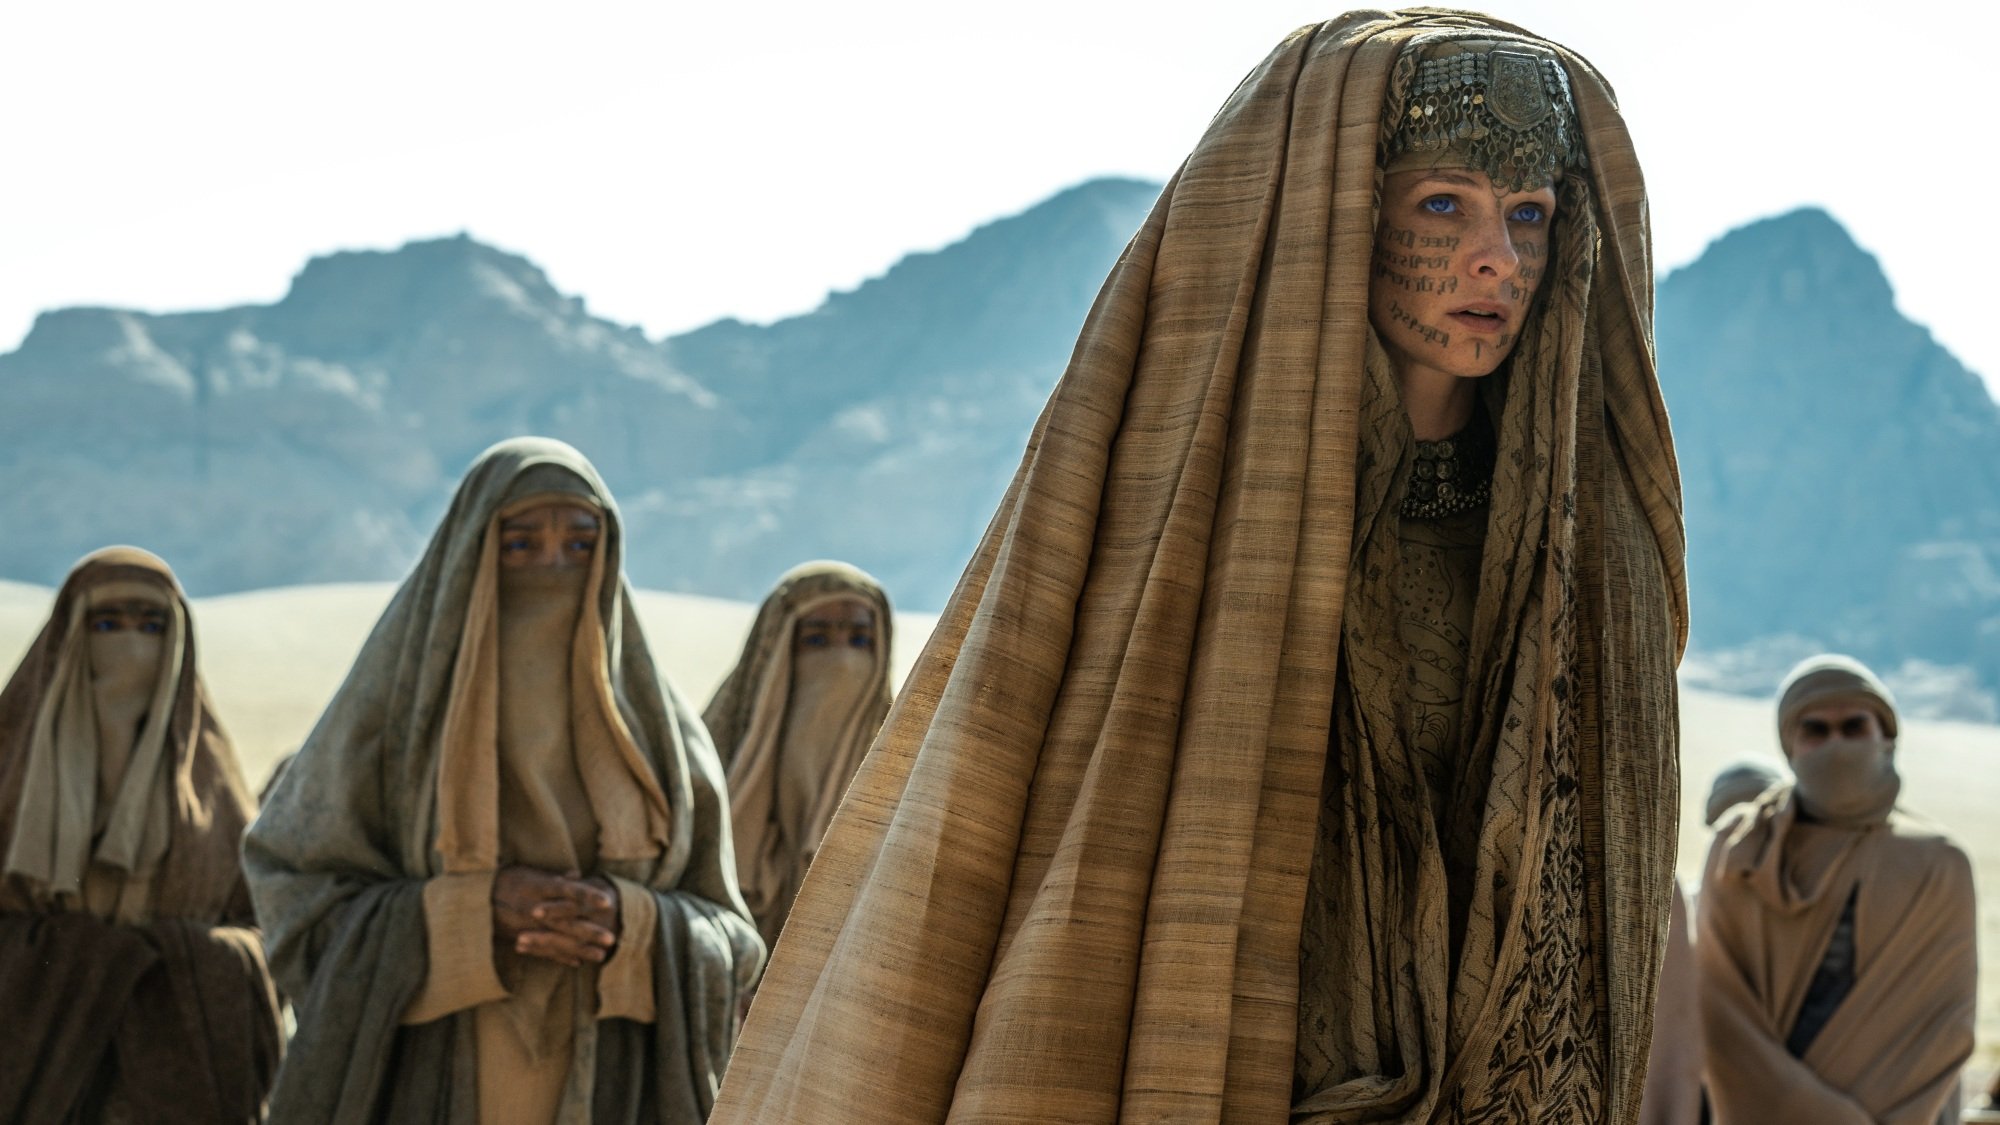 Lady Jessica and her Fremen followers walk through the desert, wearing head coverings.